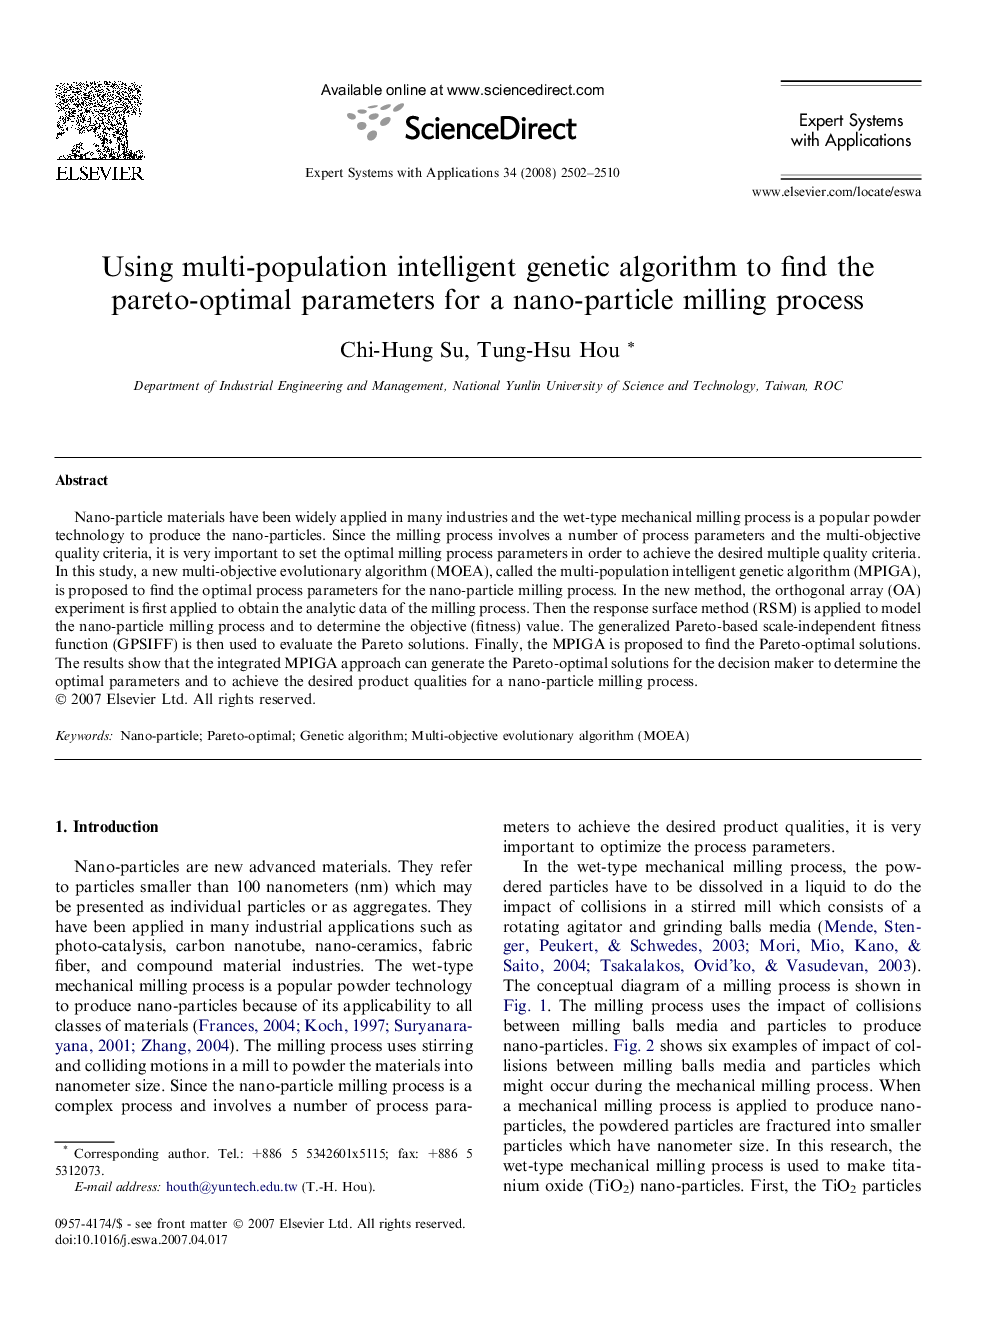 Using multi-population intelligent genetic algorithm to find the pareto-optimal parameters for a nano-particle milling process